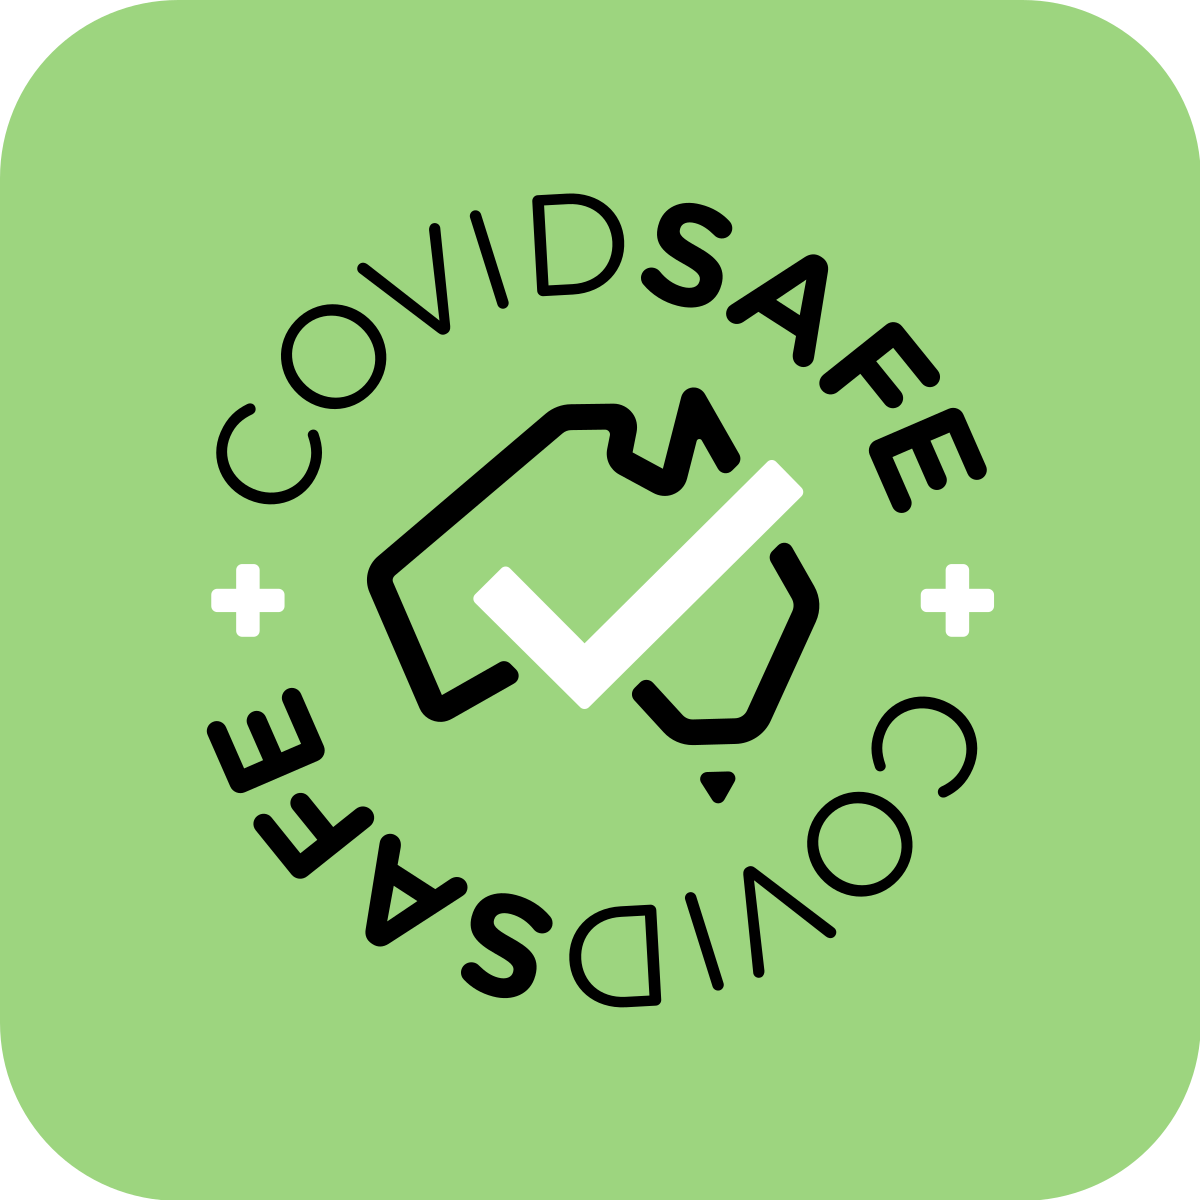 The COVIDSafe app is dead. What can we learn from this ‘failure’?